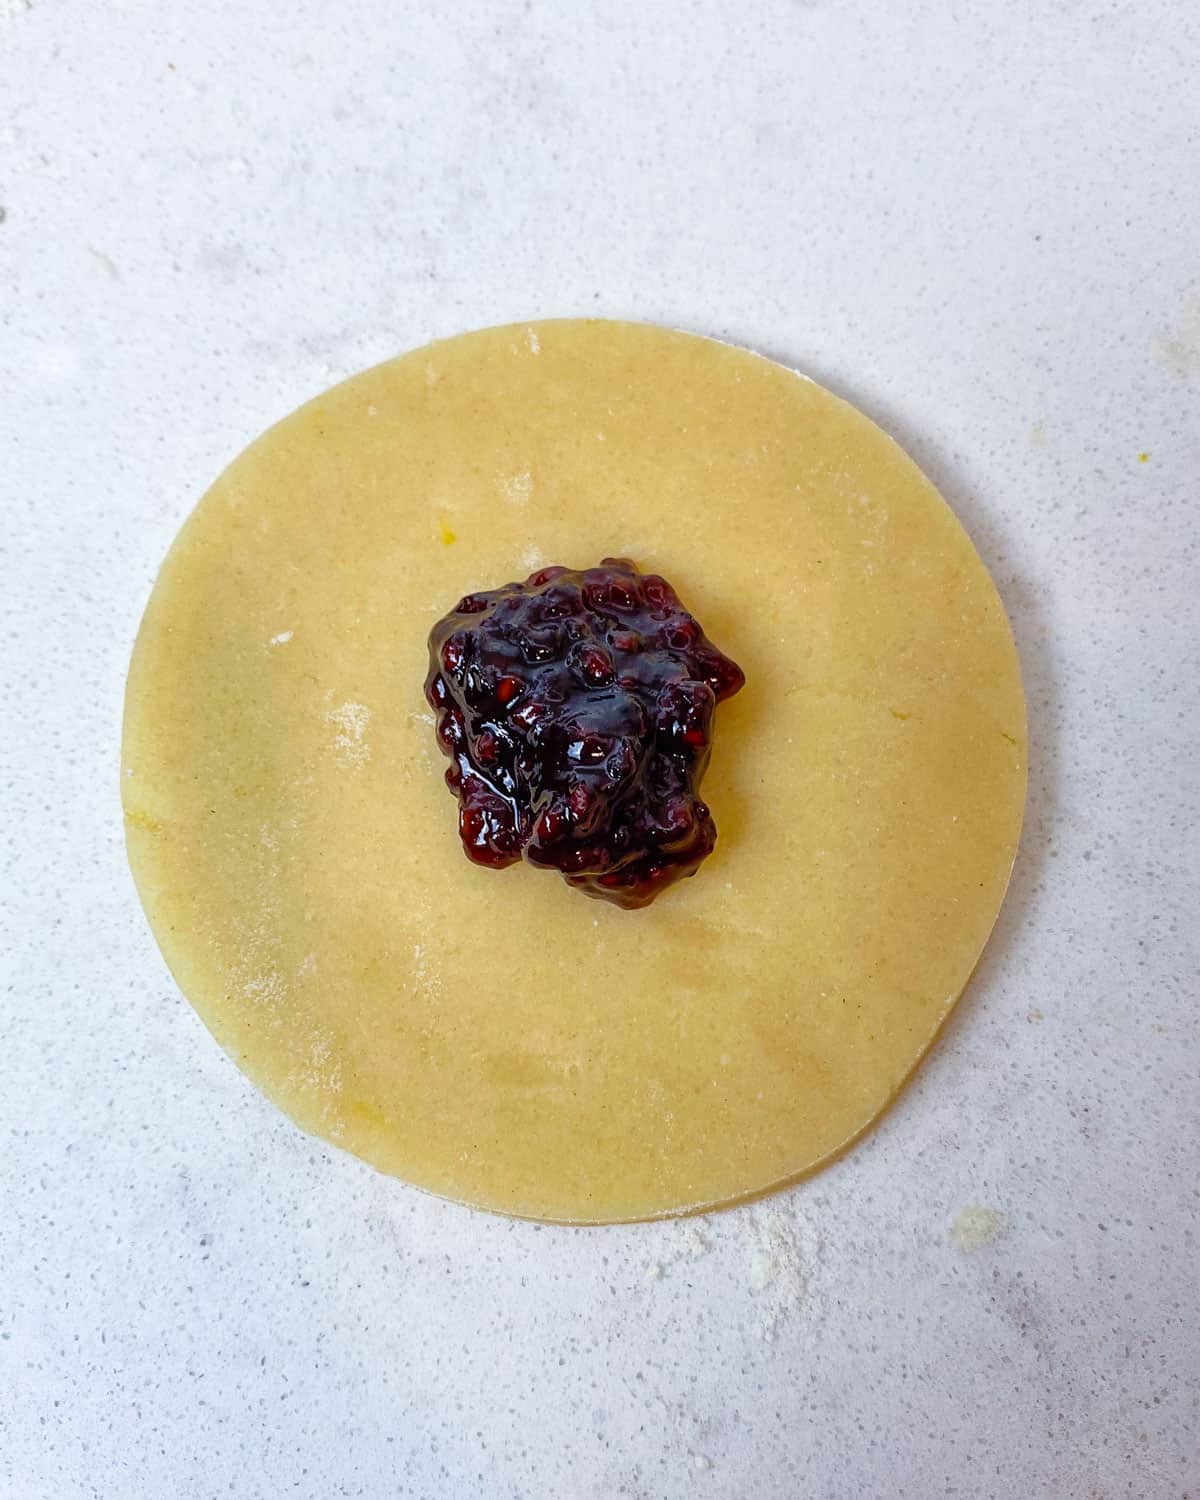 Place a teaspoon of jam in the center of the dough circle.